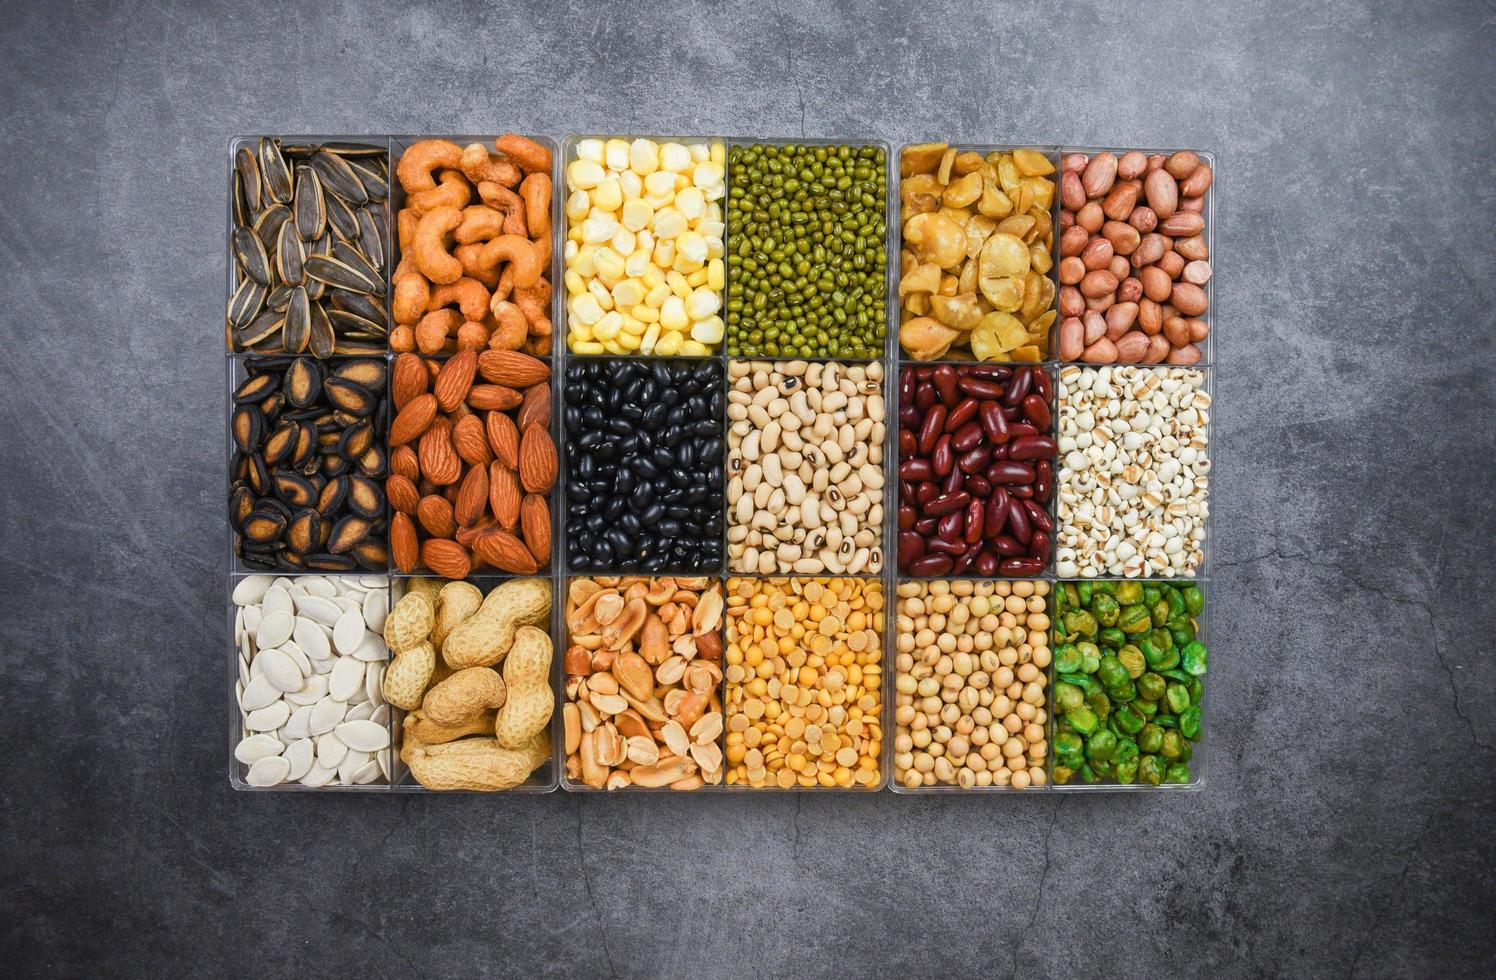 Box of different whole grains beans and legumes seeds lentils and nuts colorful snack background top view Collage various beans mix peas agriculture of natural healthy food for cooking ingredients photo